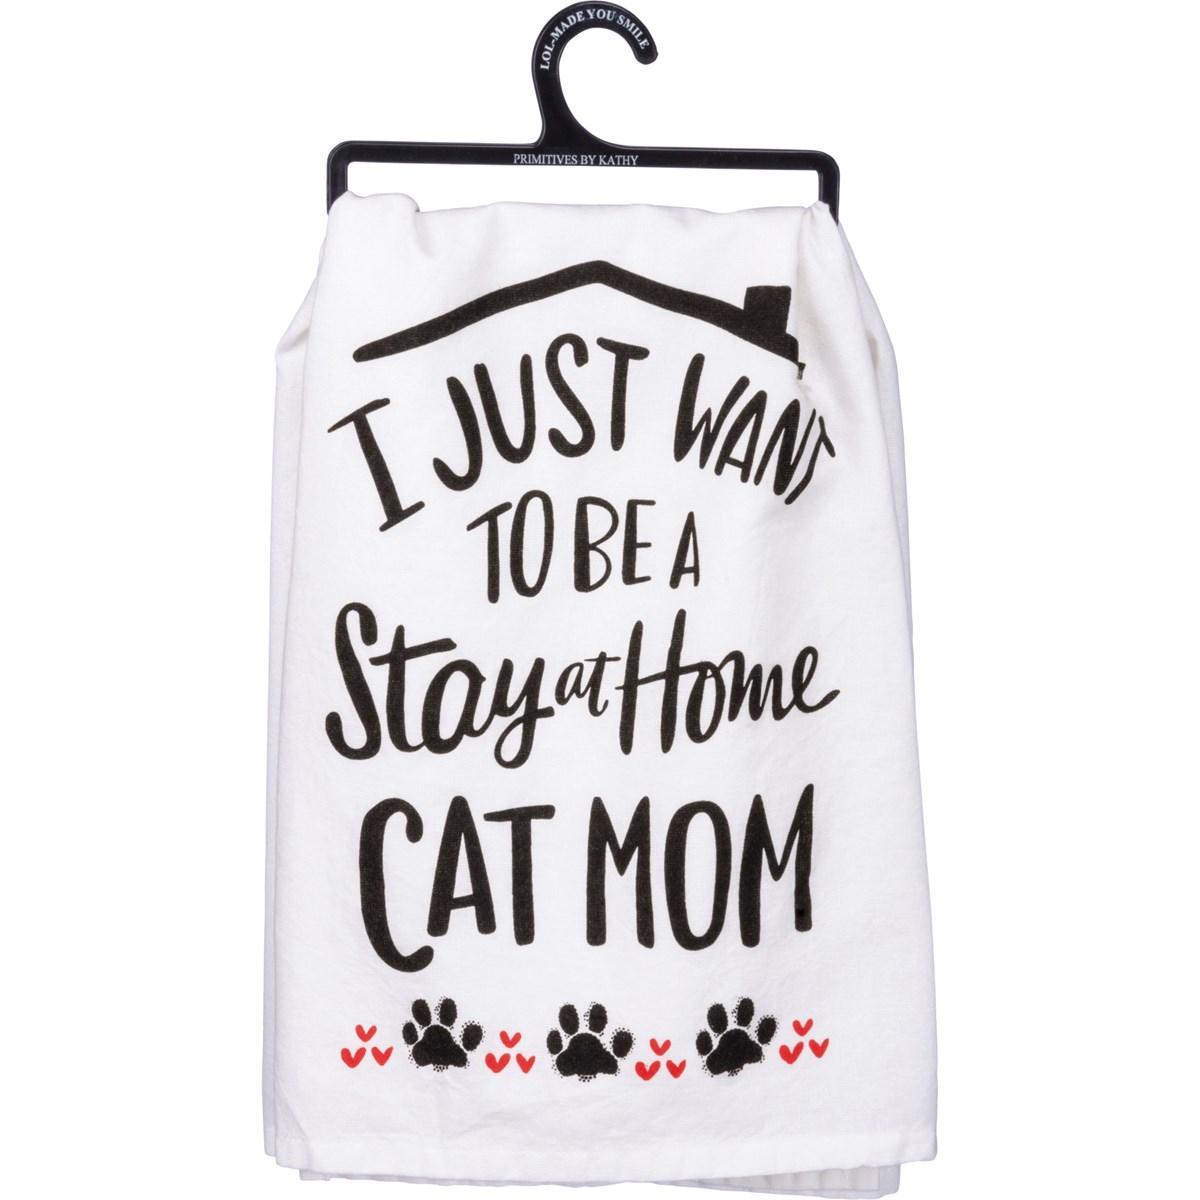 Stay At Home Cat Mom Tea Towel